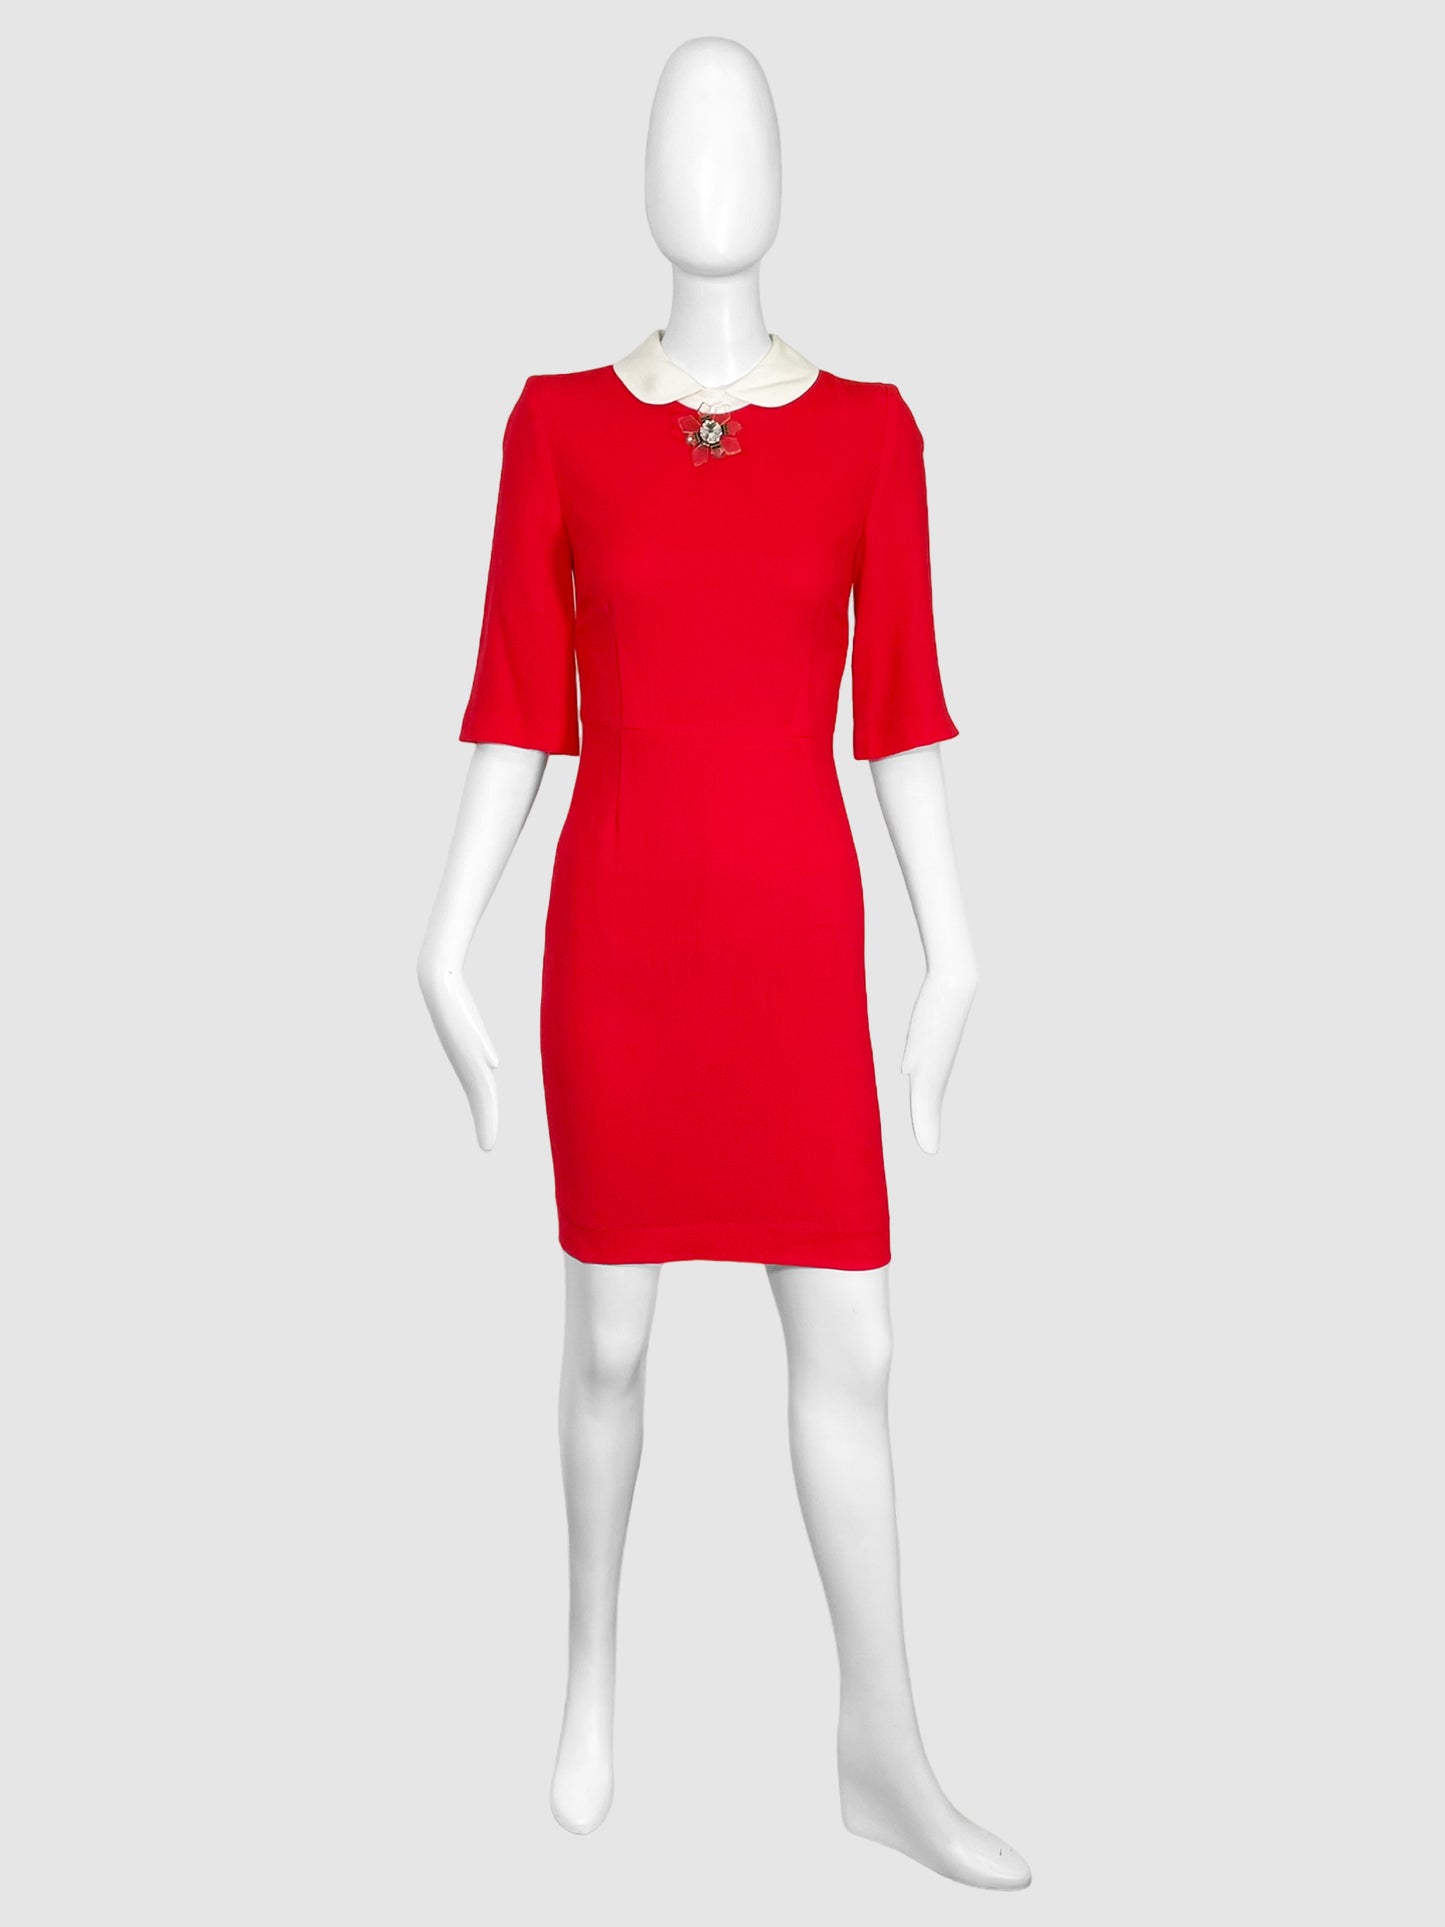 Goat Red Three-Quarter Sleeve Dress with Brooch and White Collar - Size 2